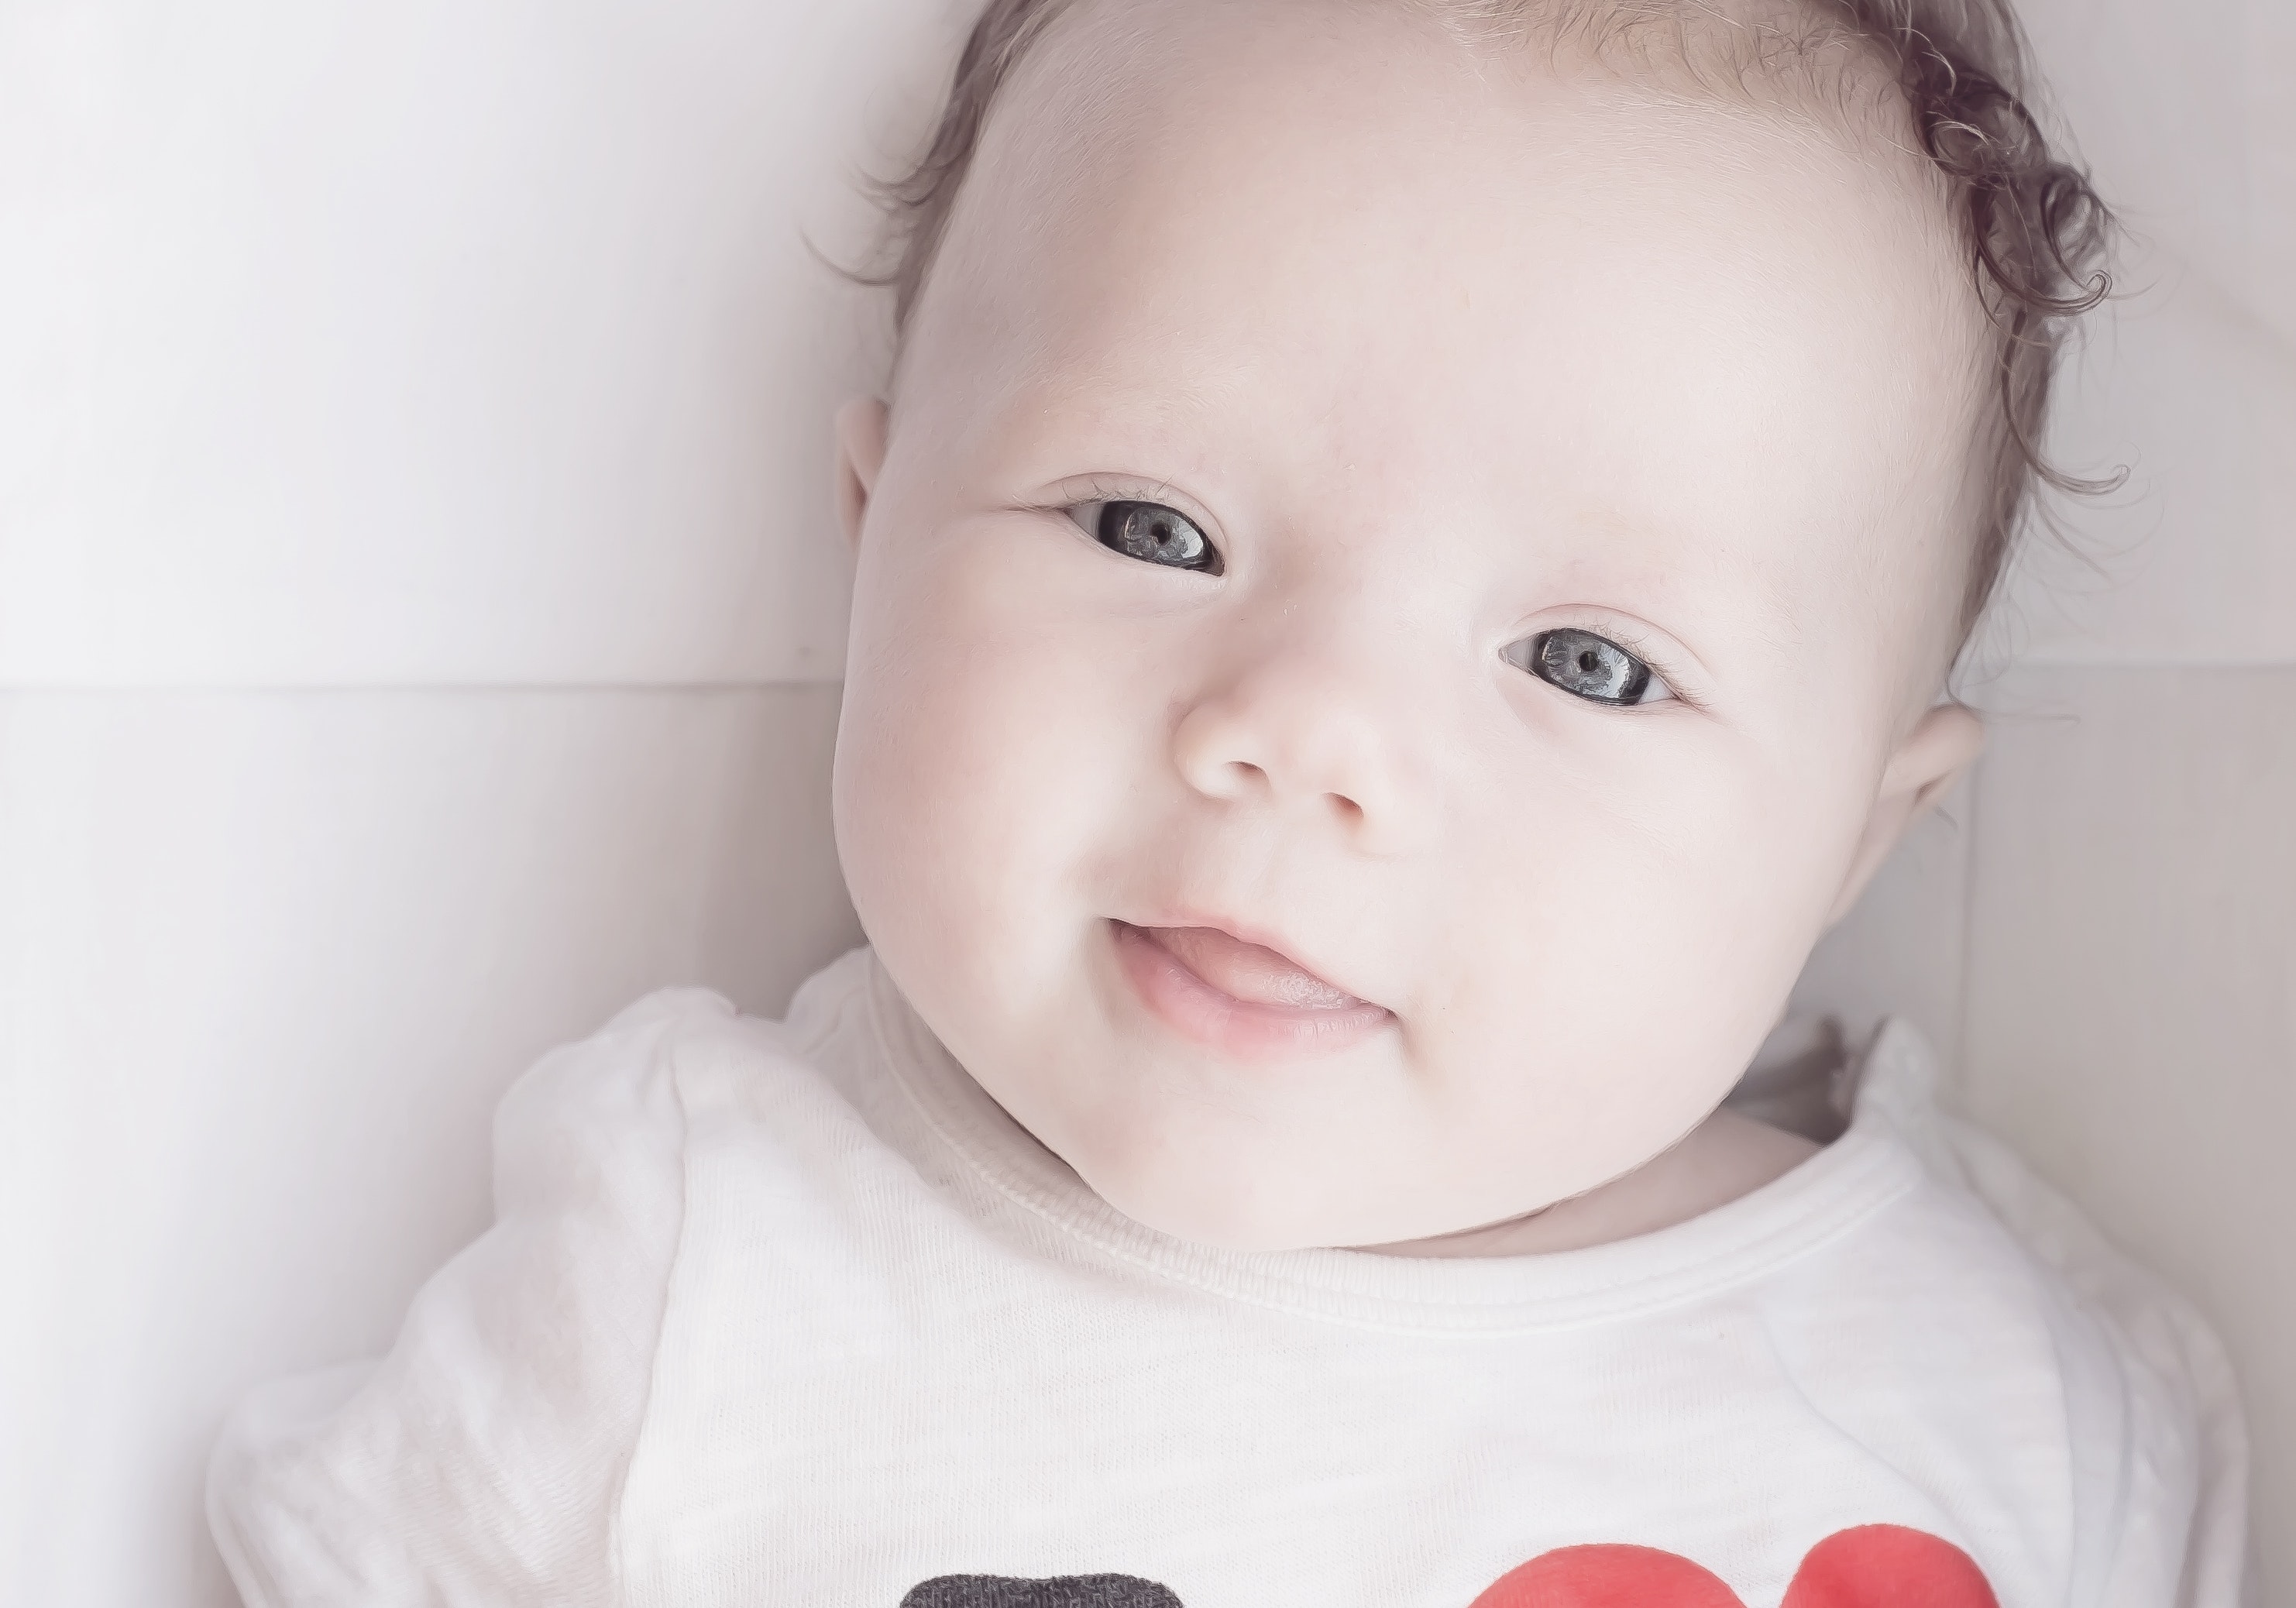 Baby Wearing White Red and Black T Shirt, Adorable, Portrait, Innocent, Joyful, HQ Photo